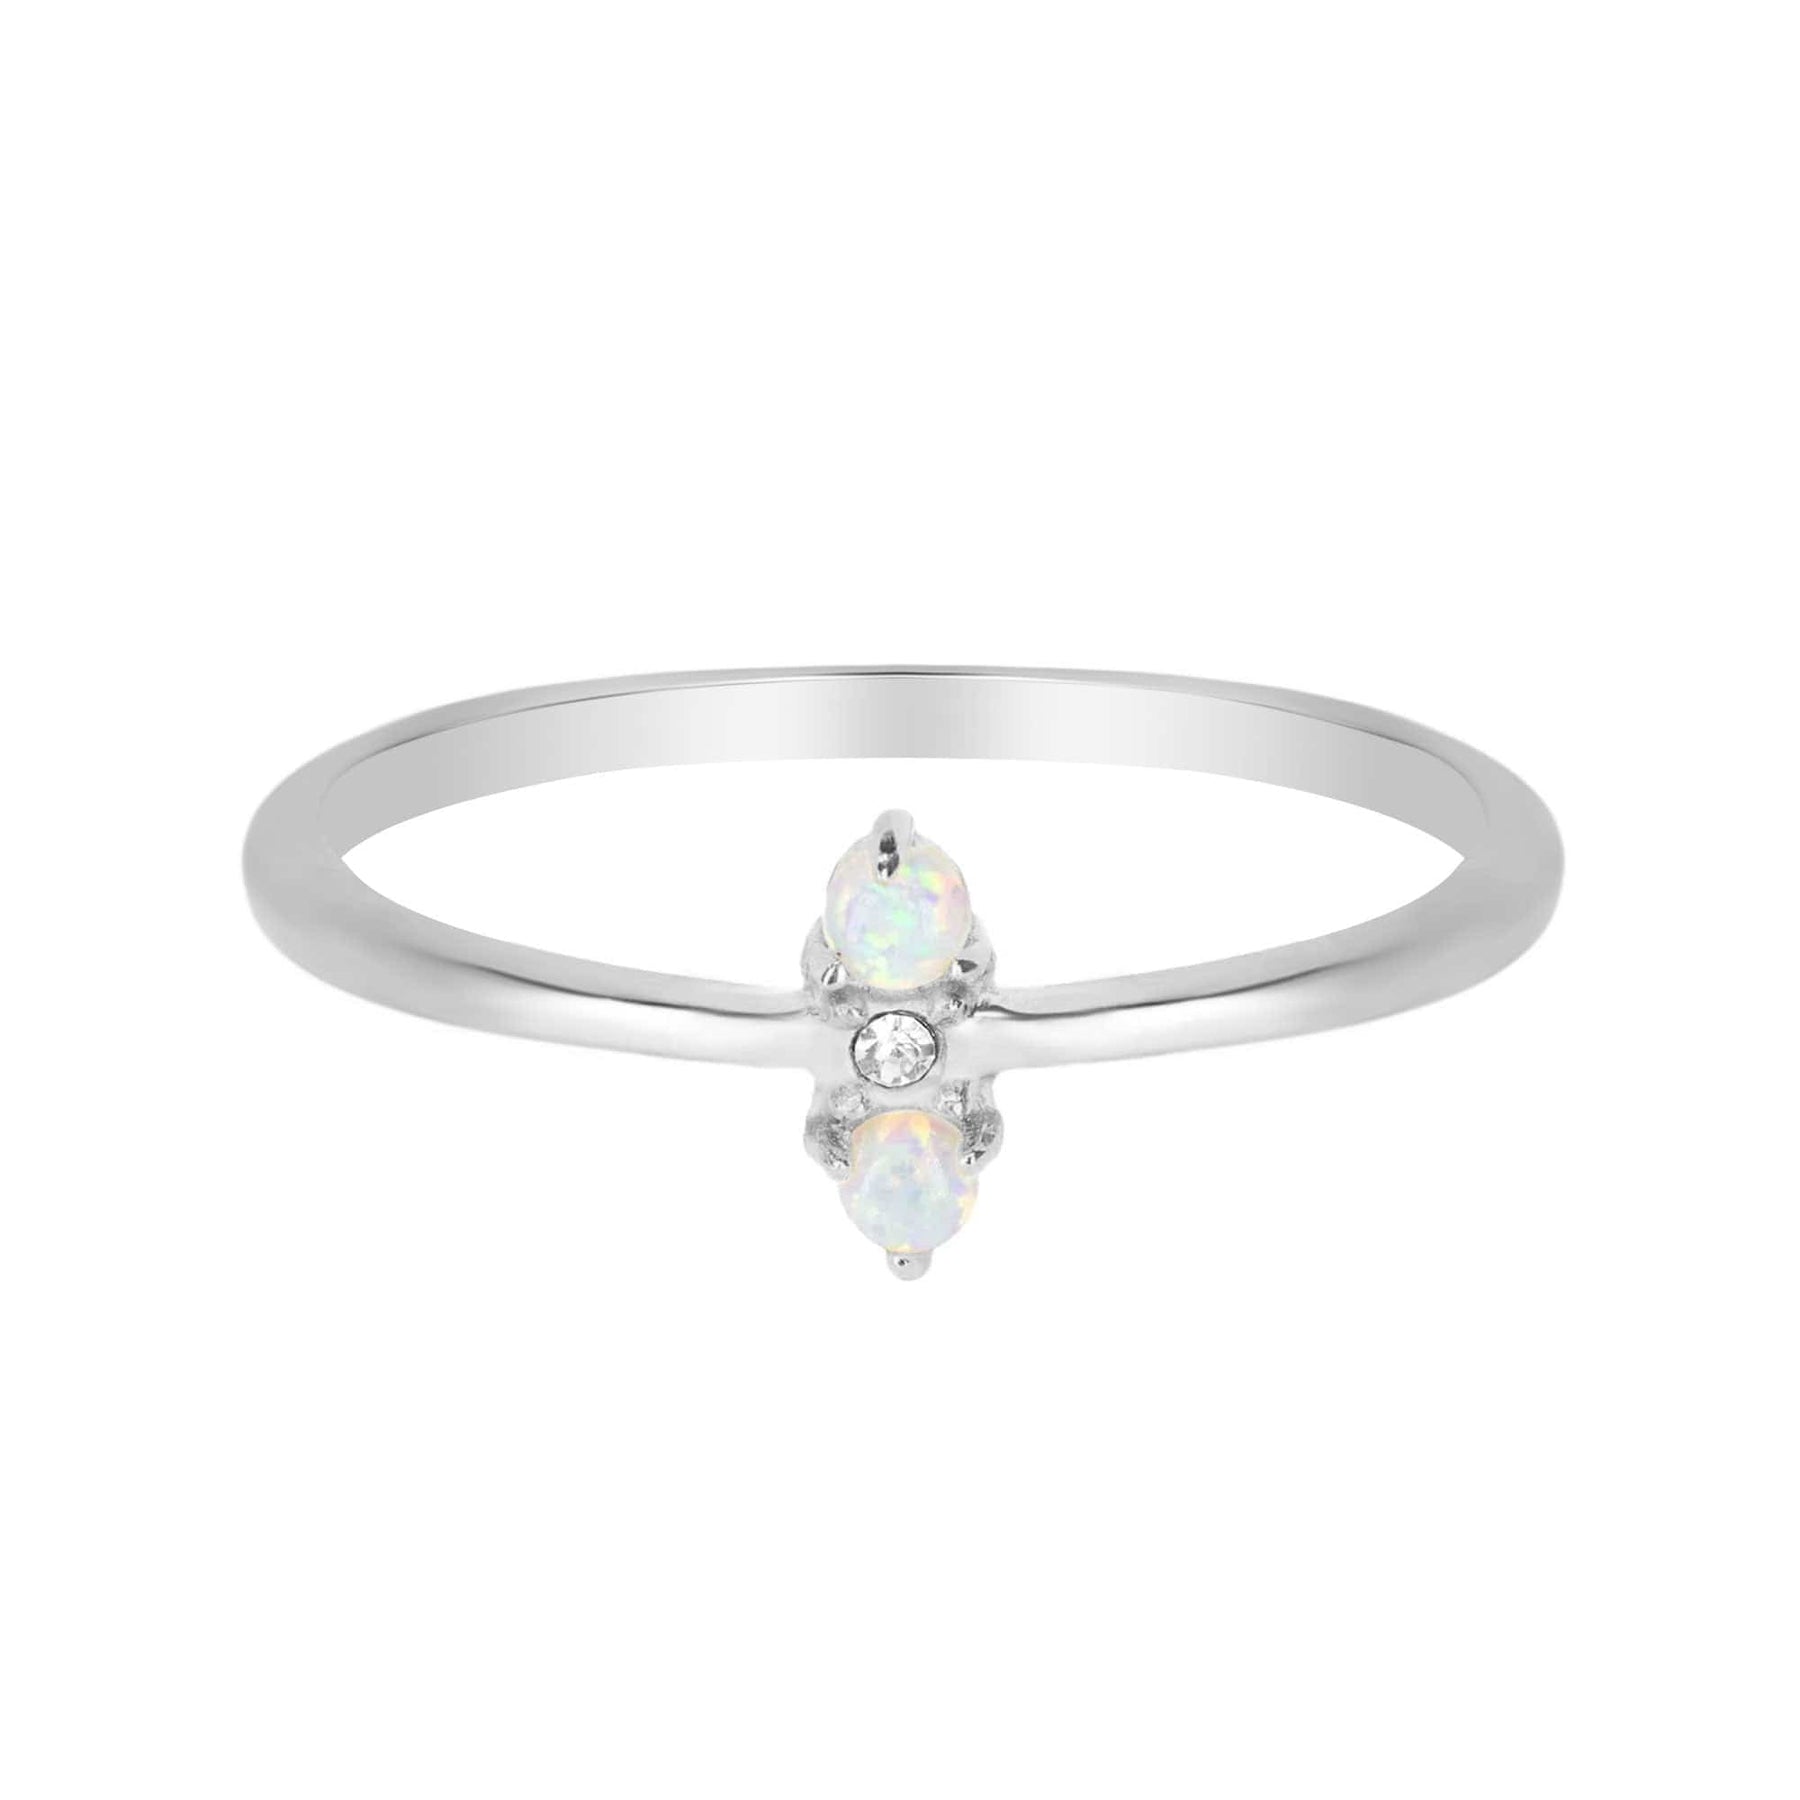 BohoMoon Stainless Steel Philipa Opal Ring Silver / US 6 / UK L / EUR 51 (small)